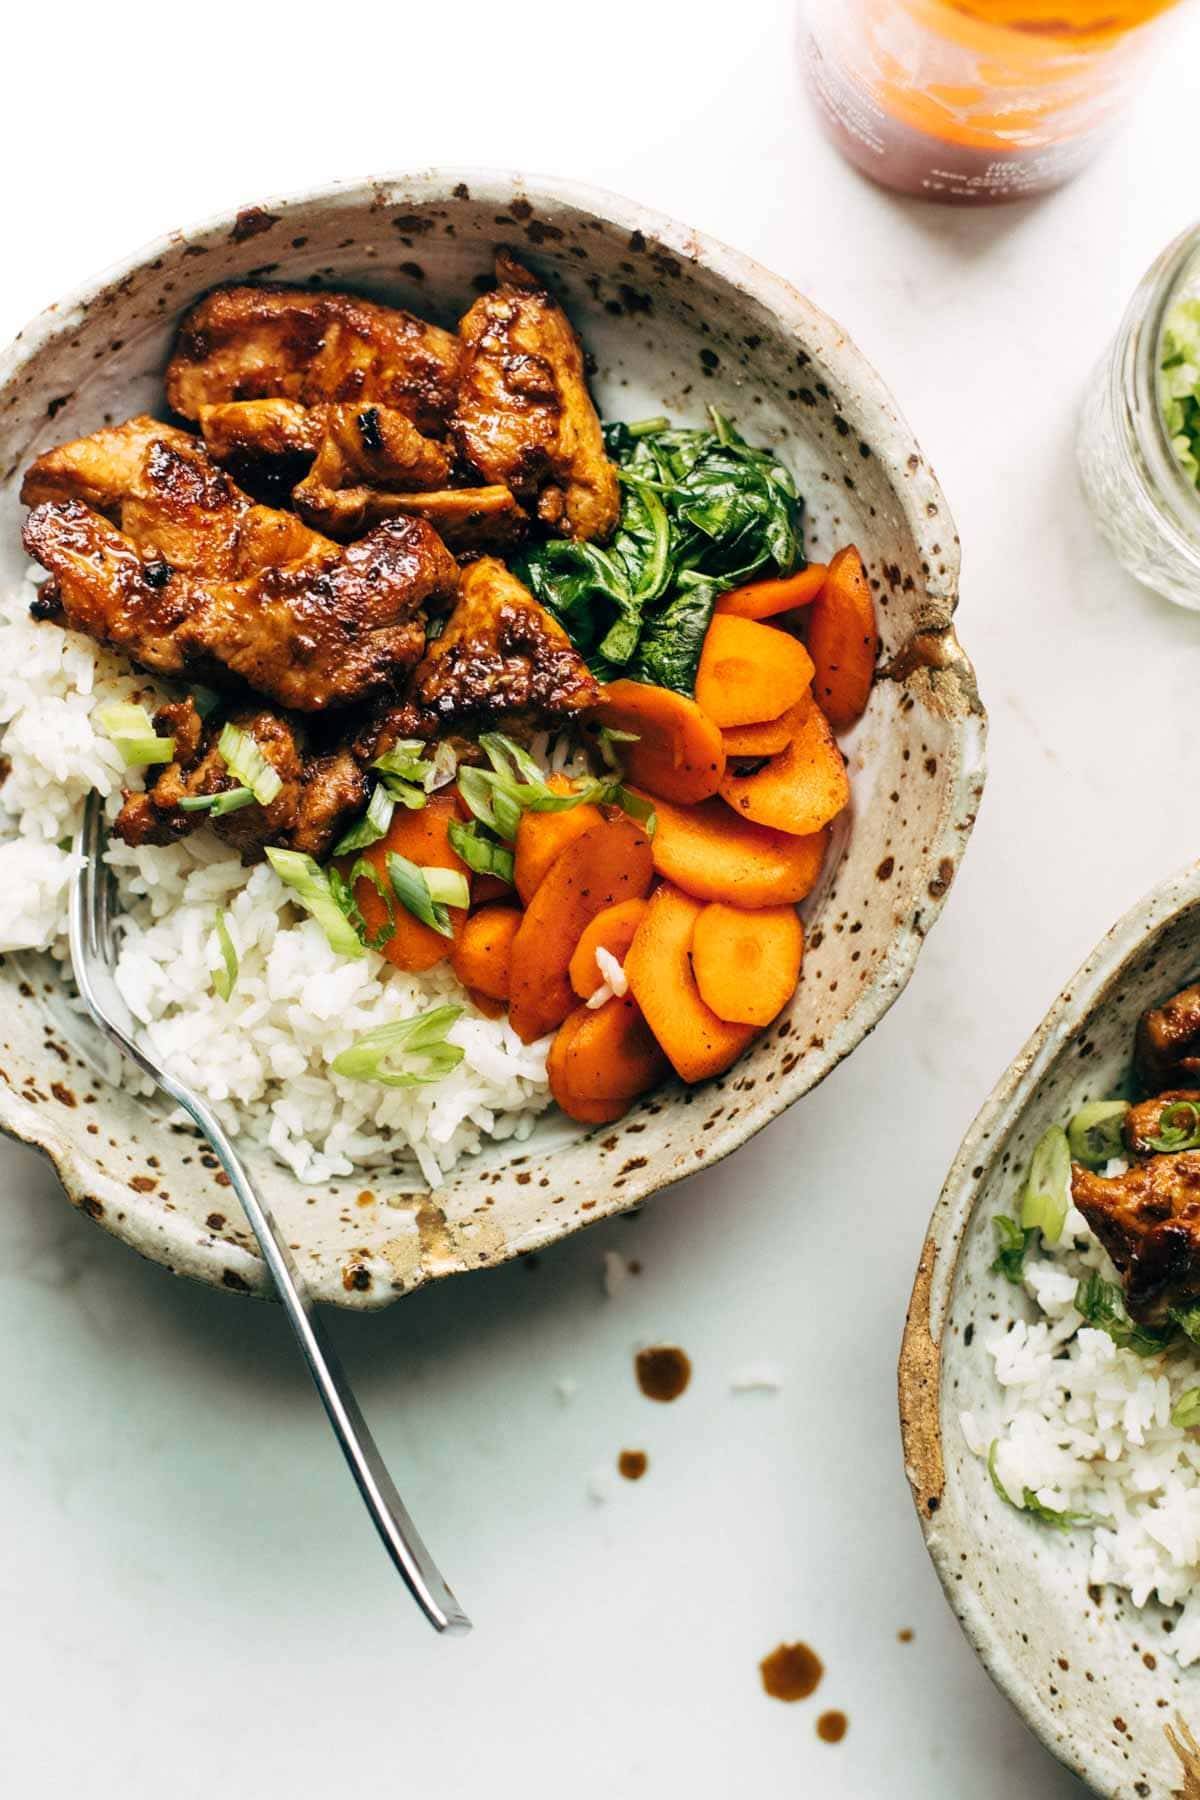 Spicy pork in a bowl with veggies and rice.